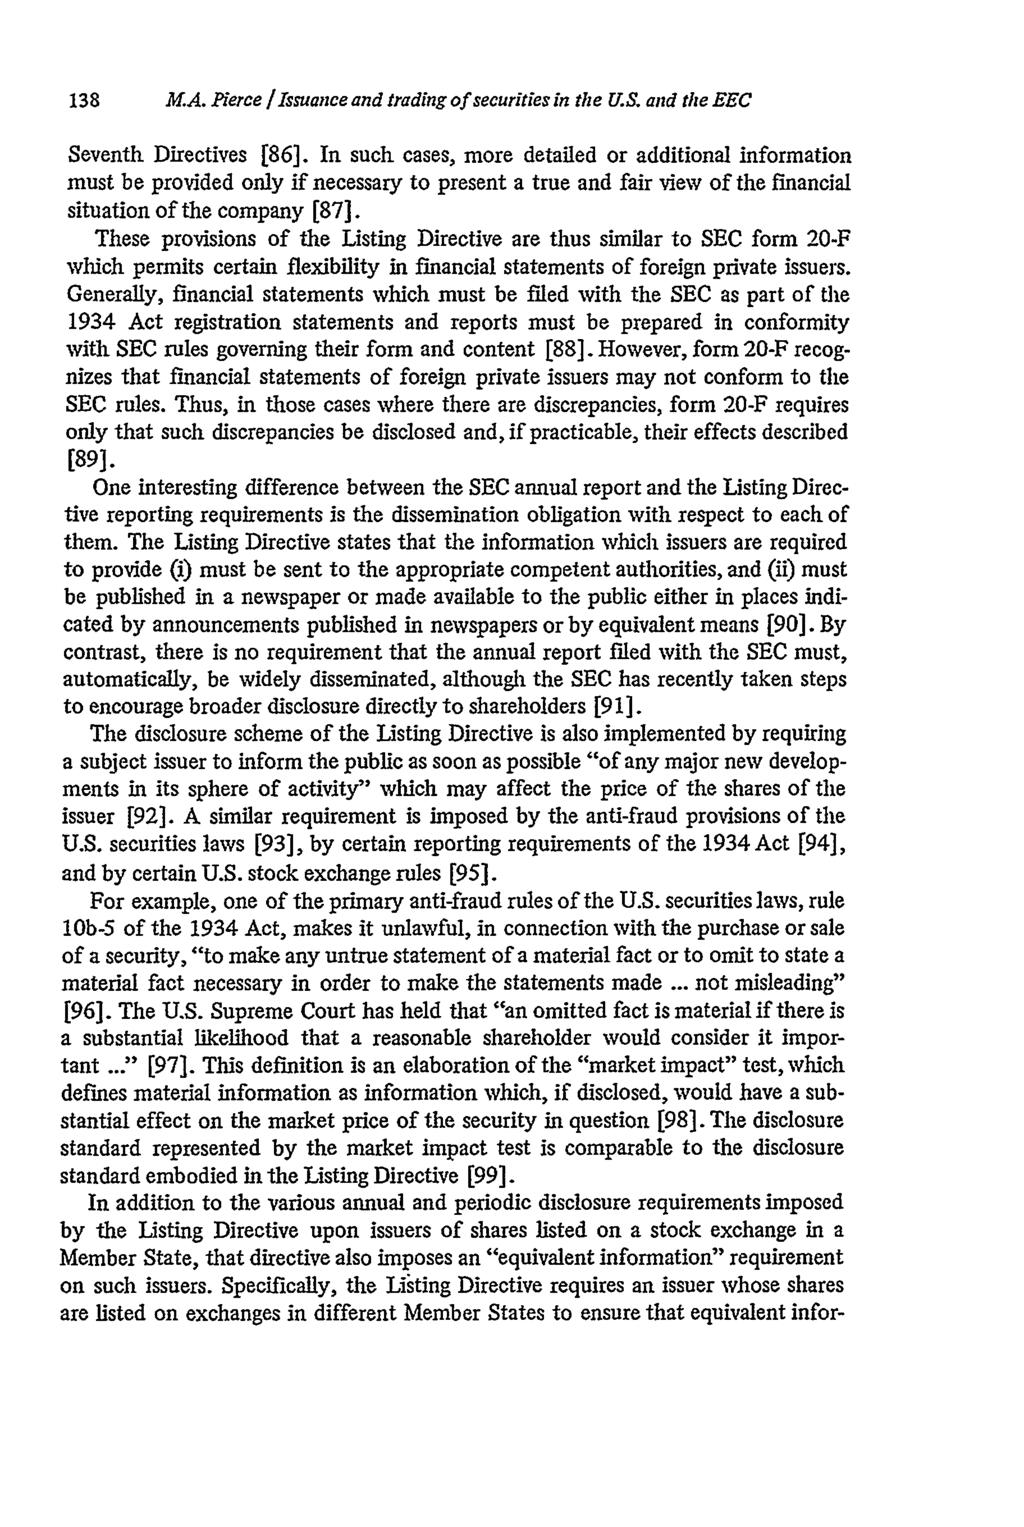 University of Pennsylvania Journal of International Law, Vol. 3, Iss. 2 [2014], Art. 3 138 M.A. Pierce /Issuance and trading of securities in the U.S. and the EEC Seventh Directives [86].